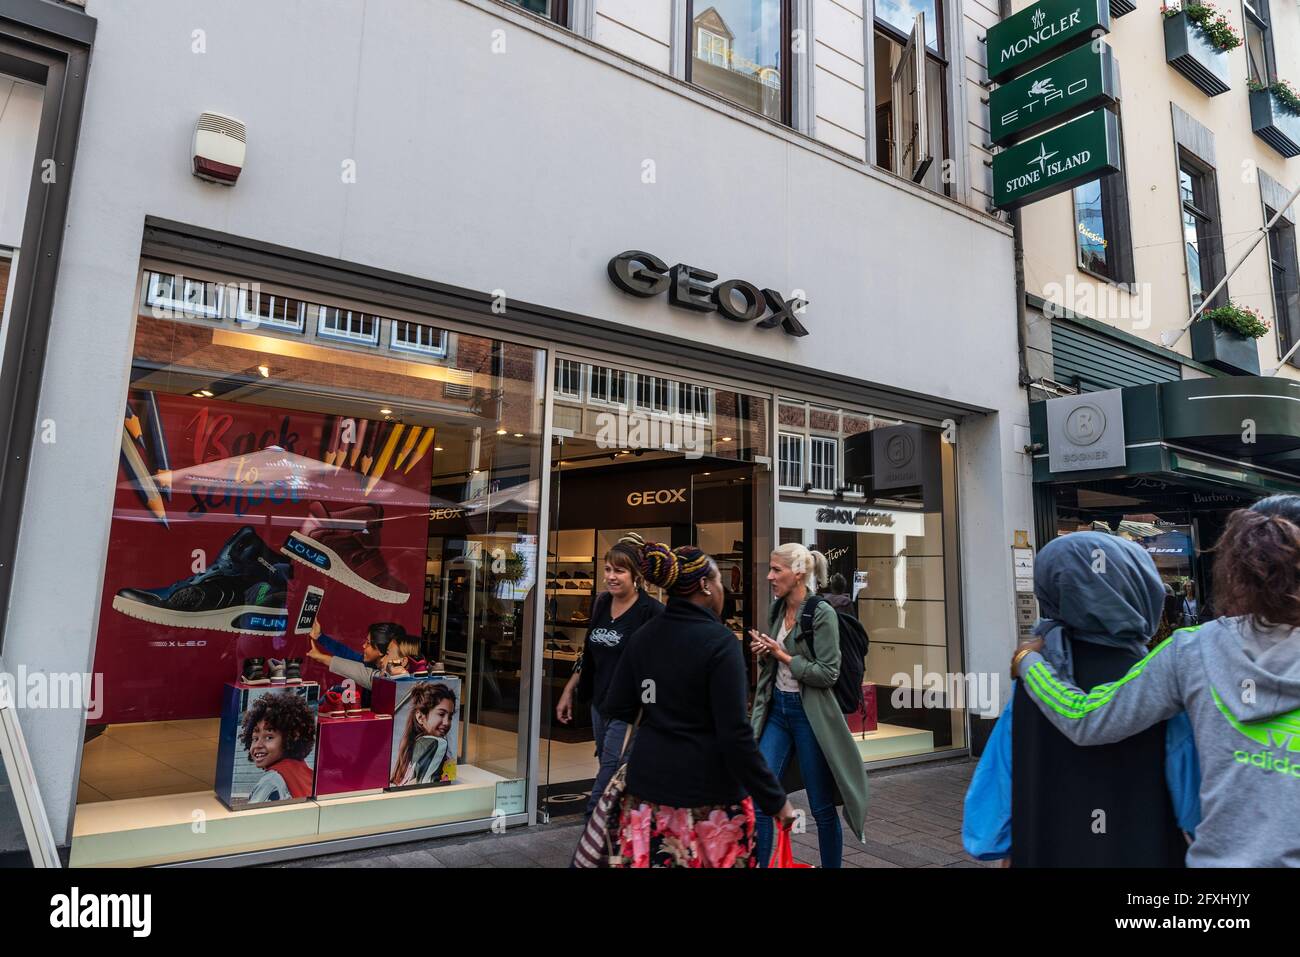 Markér gave slump Bremen, Germany - August 19, 2019: Facade of a Geox shoe store with people  around in a shopping street of Bremen, Germany Stock Photo - Alamy